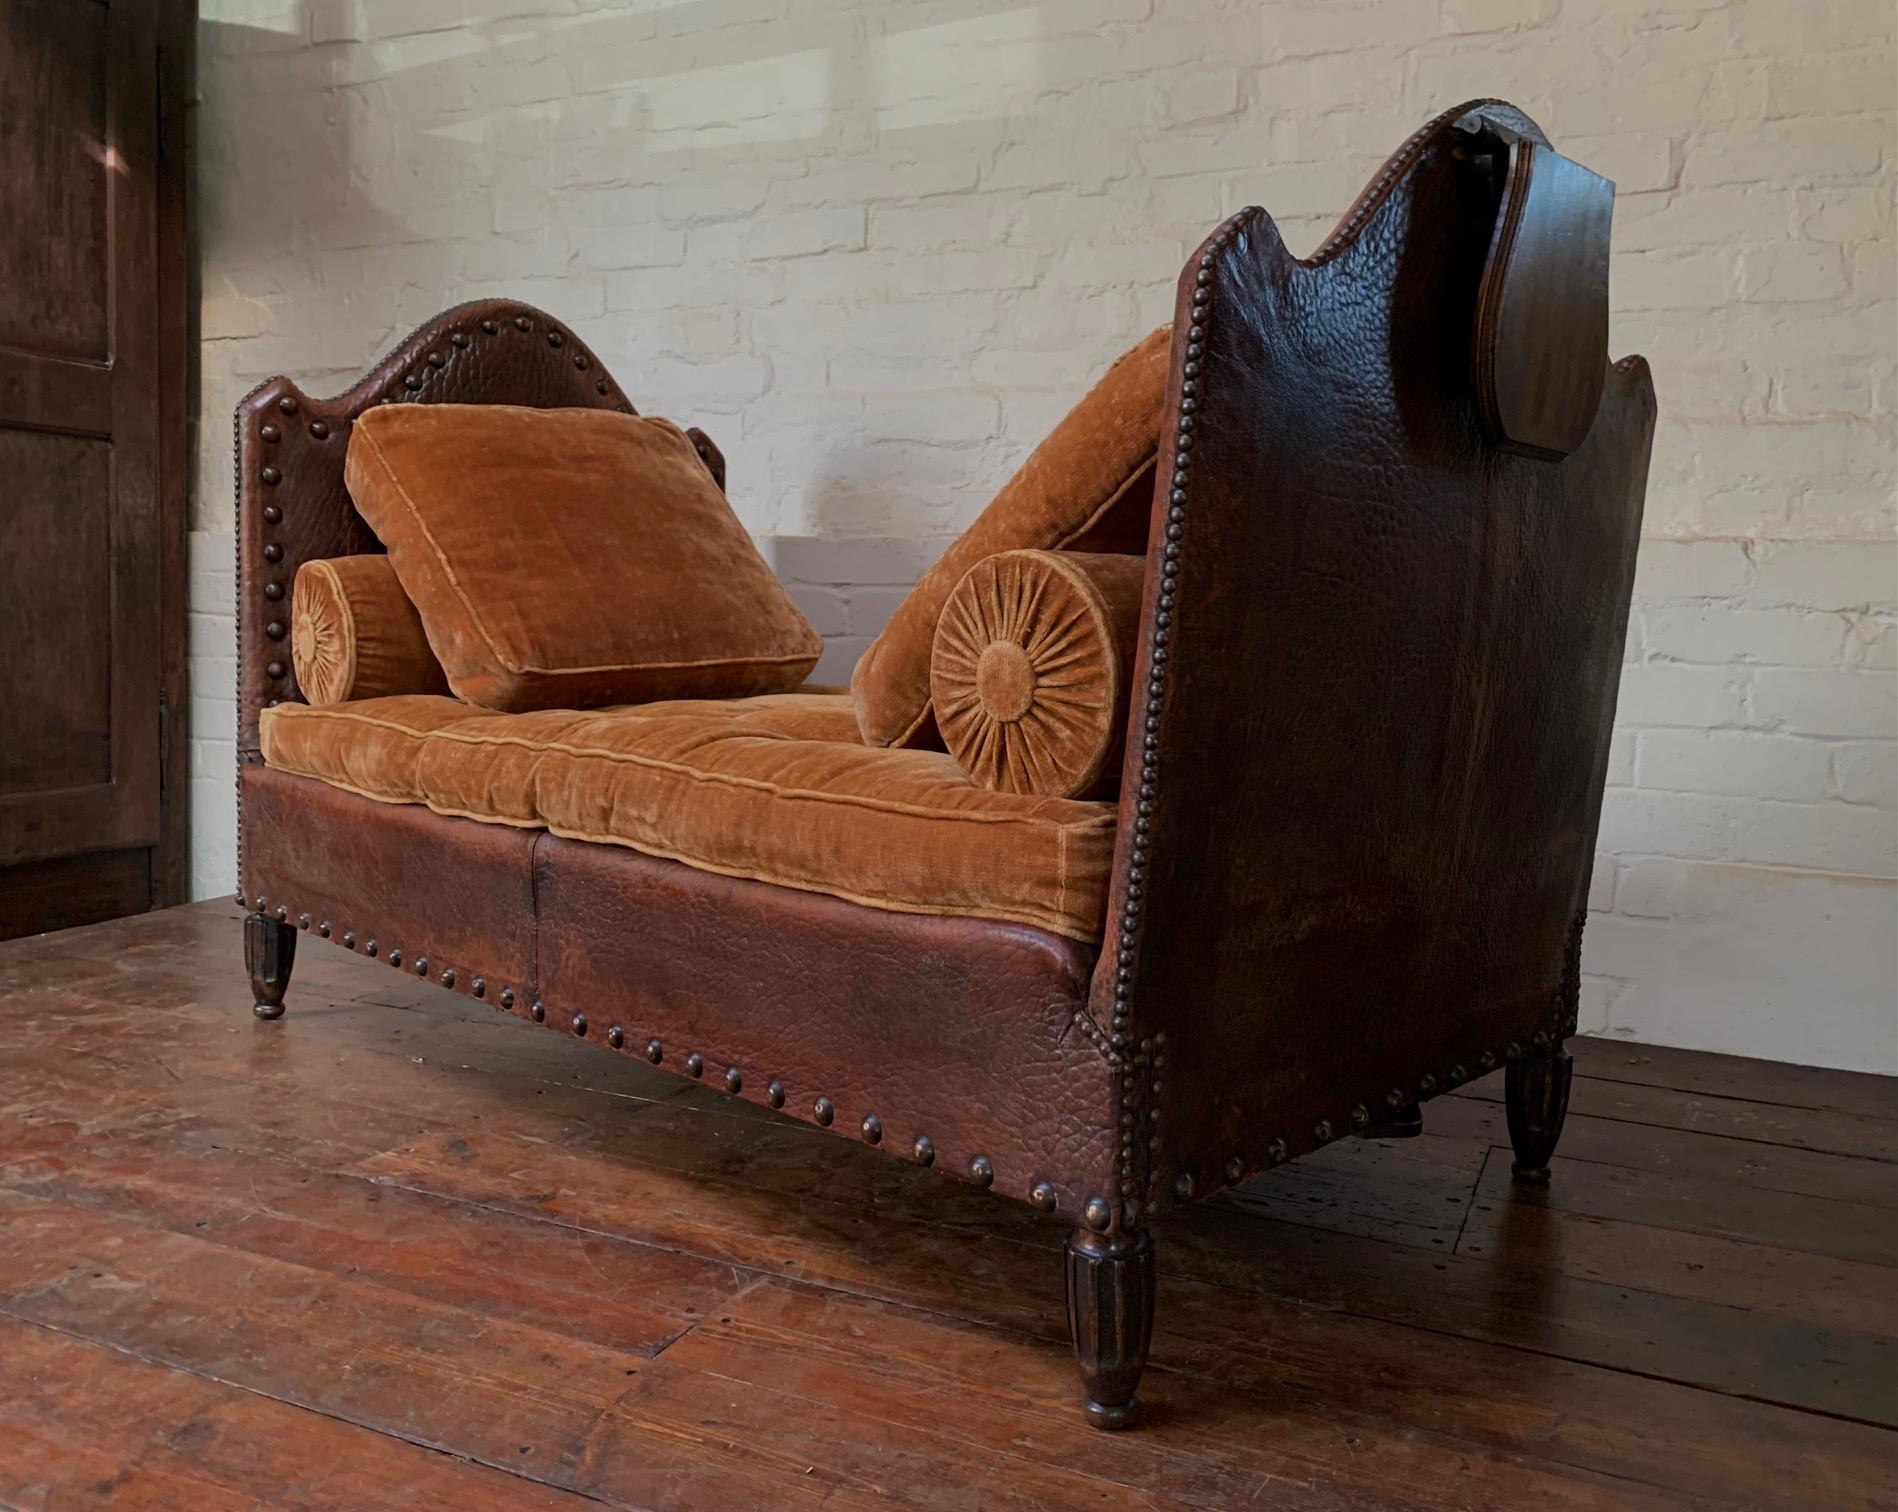 An Exquisite and Rare French Leather Daybed Completely Original, Circa 1920's For Sale 10